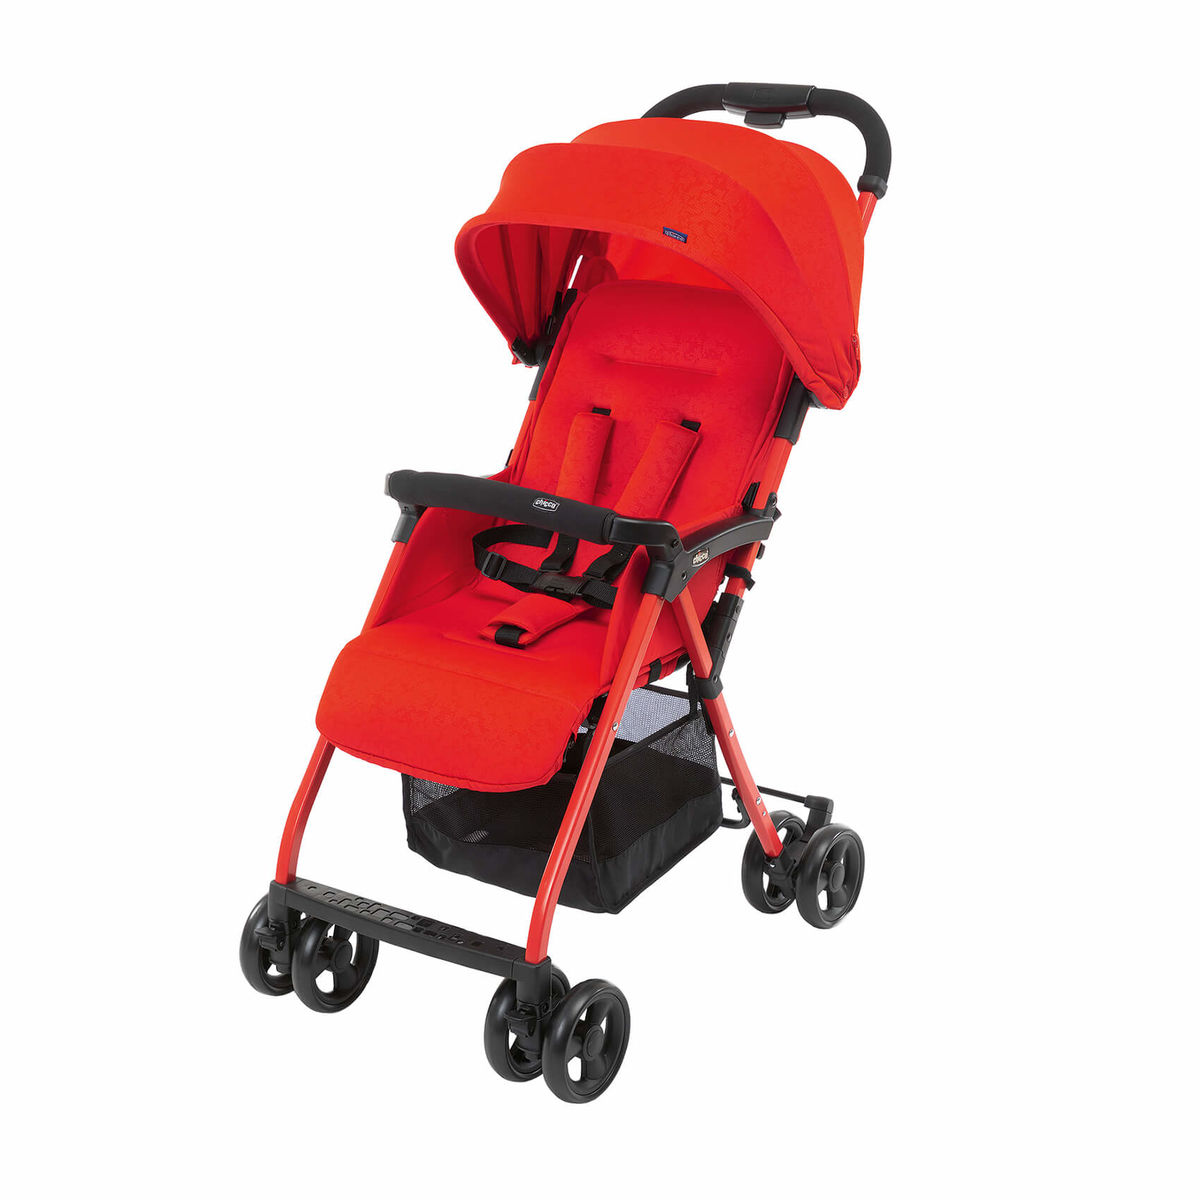 Image of Chicco Ohlalà3 Kinderwagen Passion rot bei nettoshop.ch